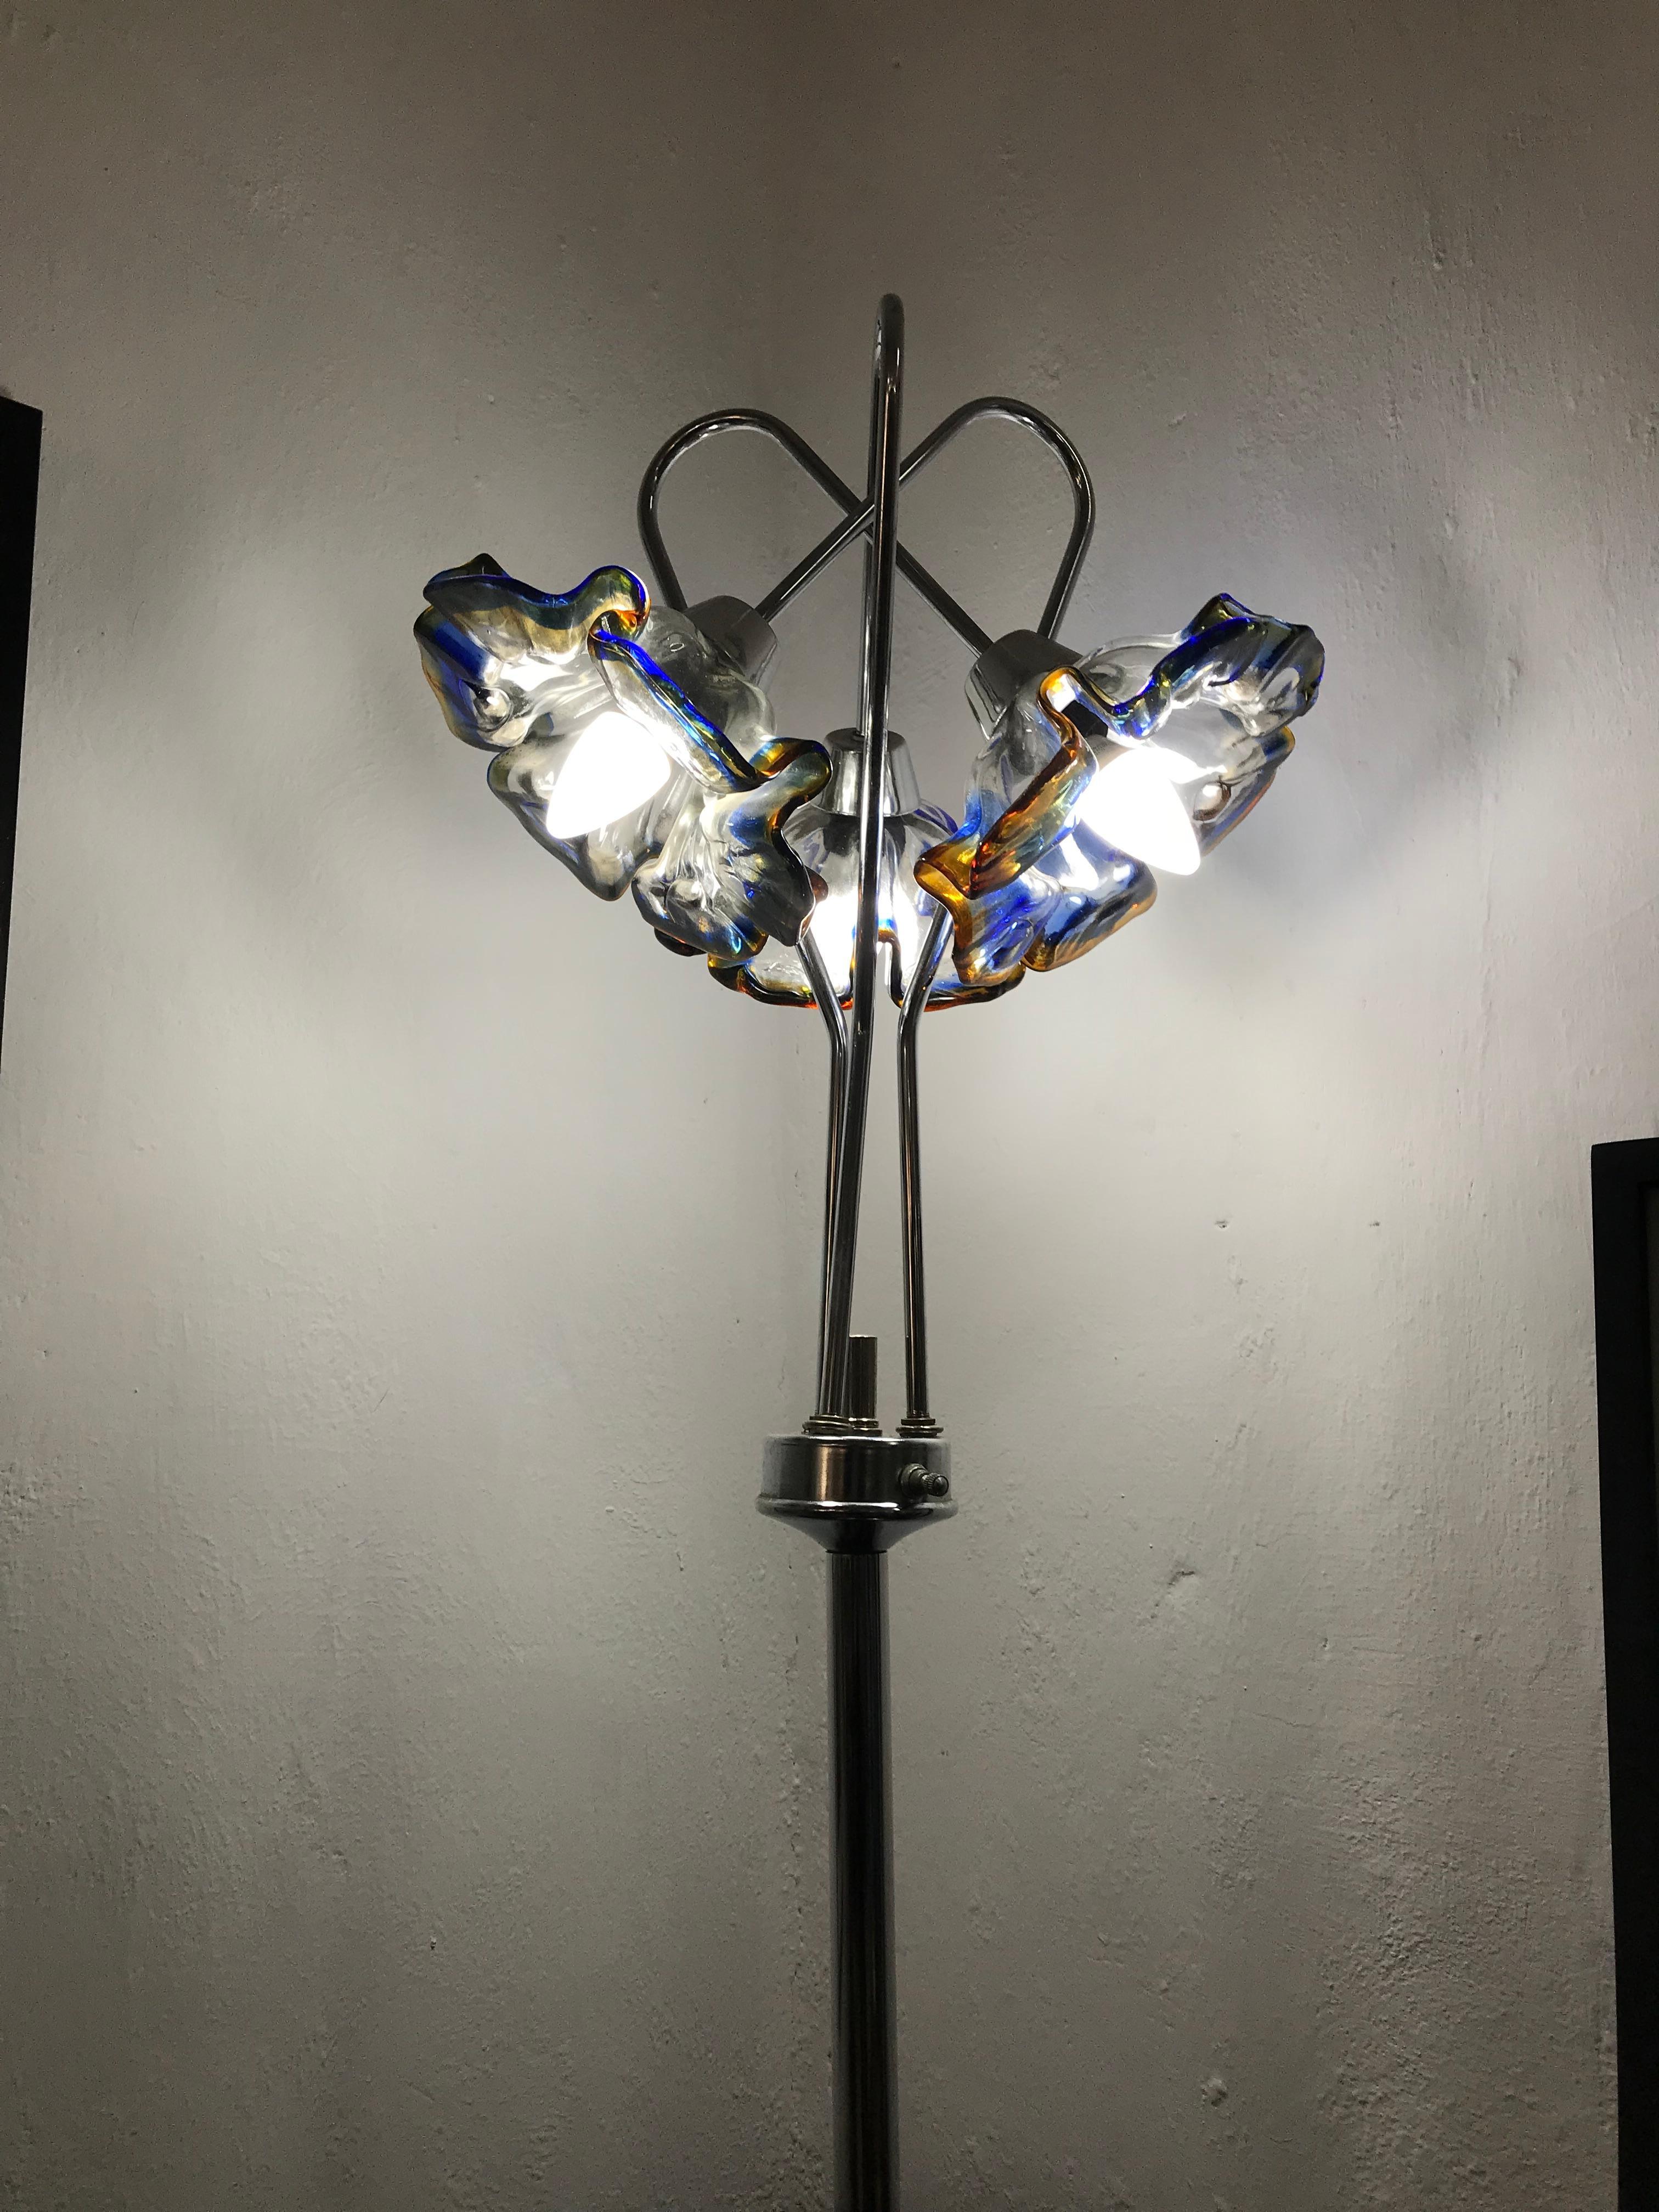 Late 20th Century Mid-Century Modern Table Lamp by Mazzega in Murano Glass and Chrome, circa 1970 For Sale